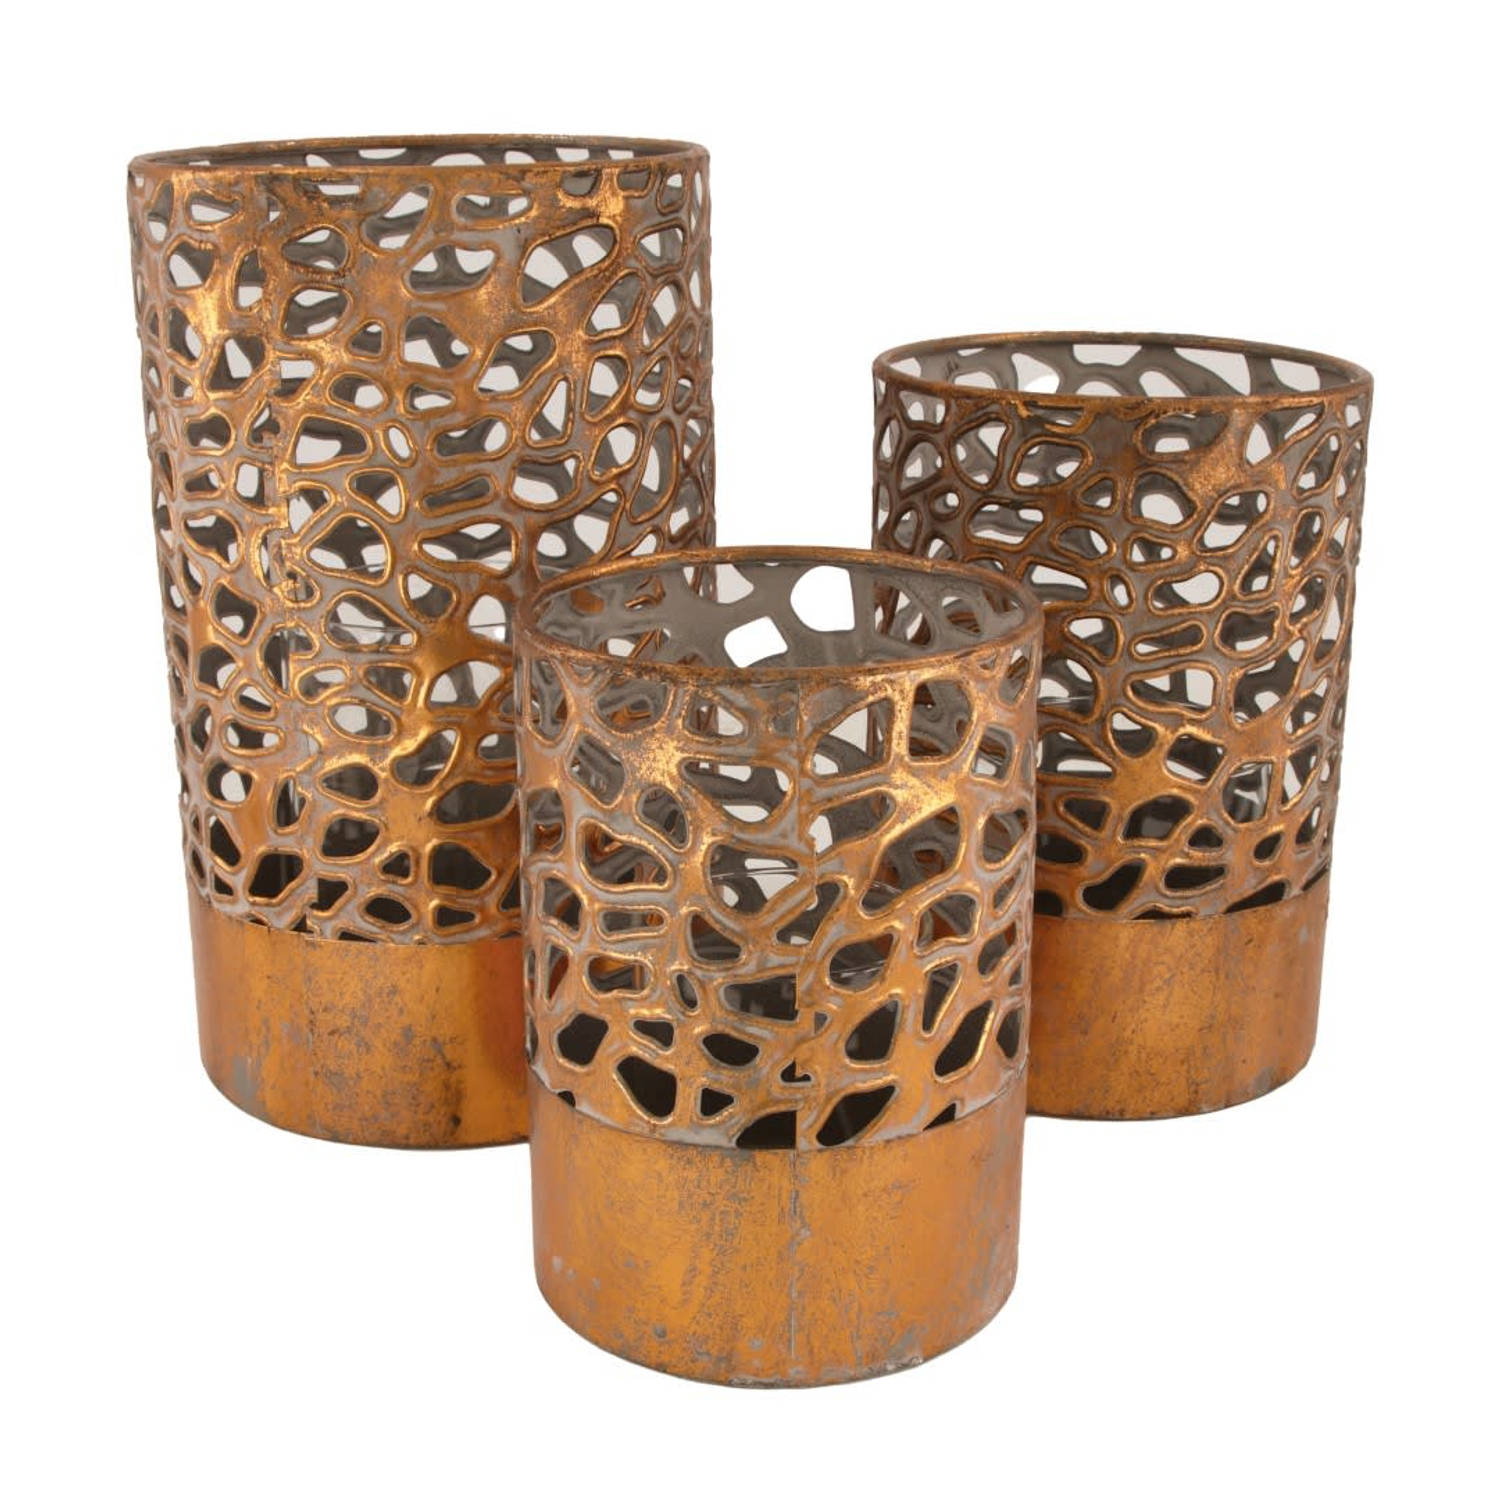 Dijk Natural Collections - Candle holder metal with glass 17x28cm S-3 - Koper